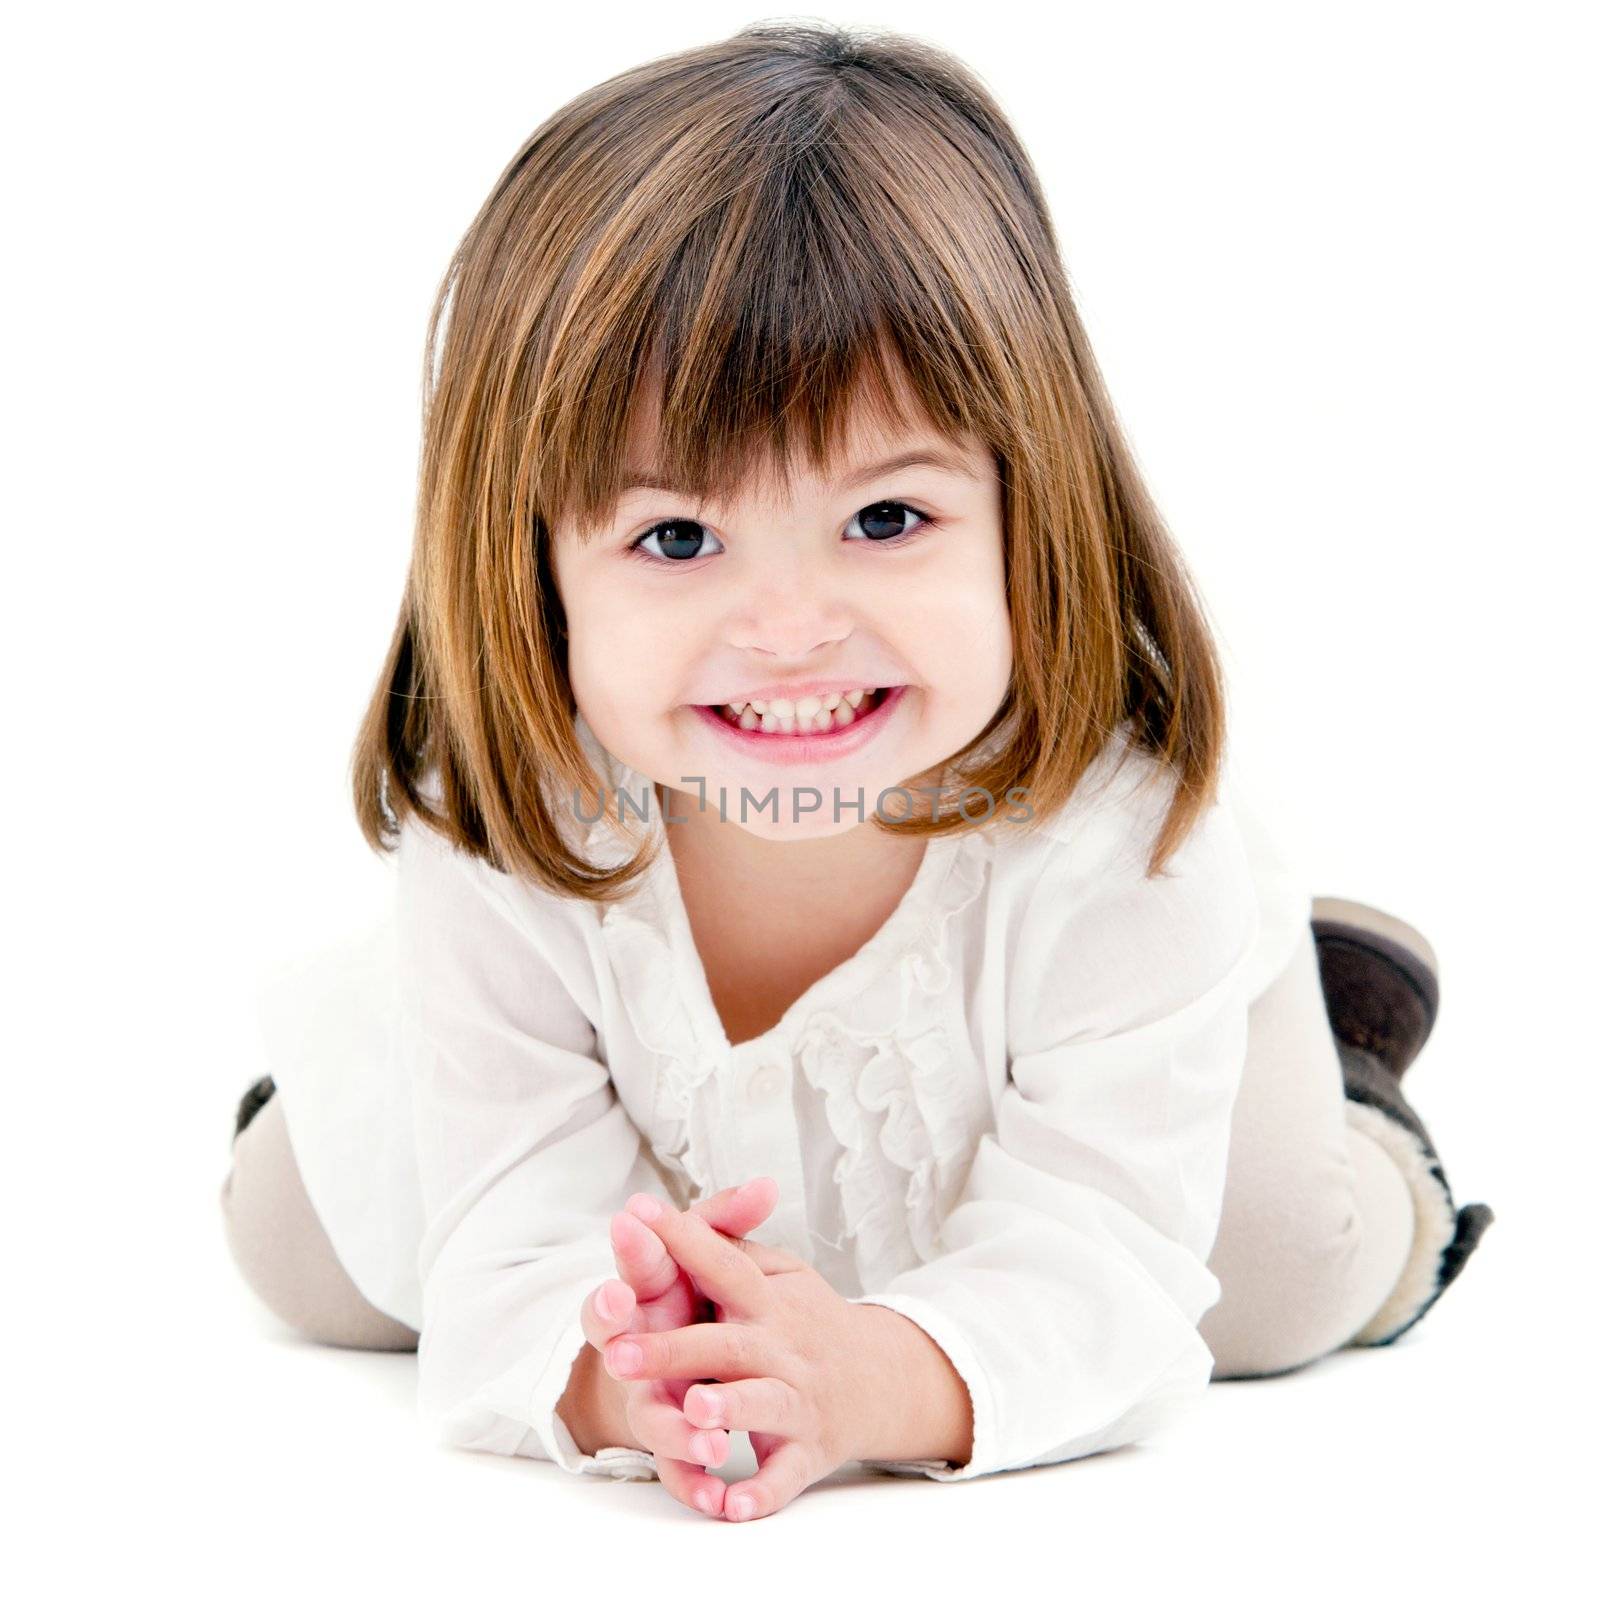 Portrait of cute little girl with toothy smile. Isolated on white background.